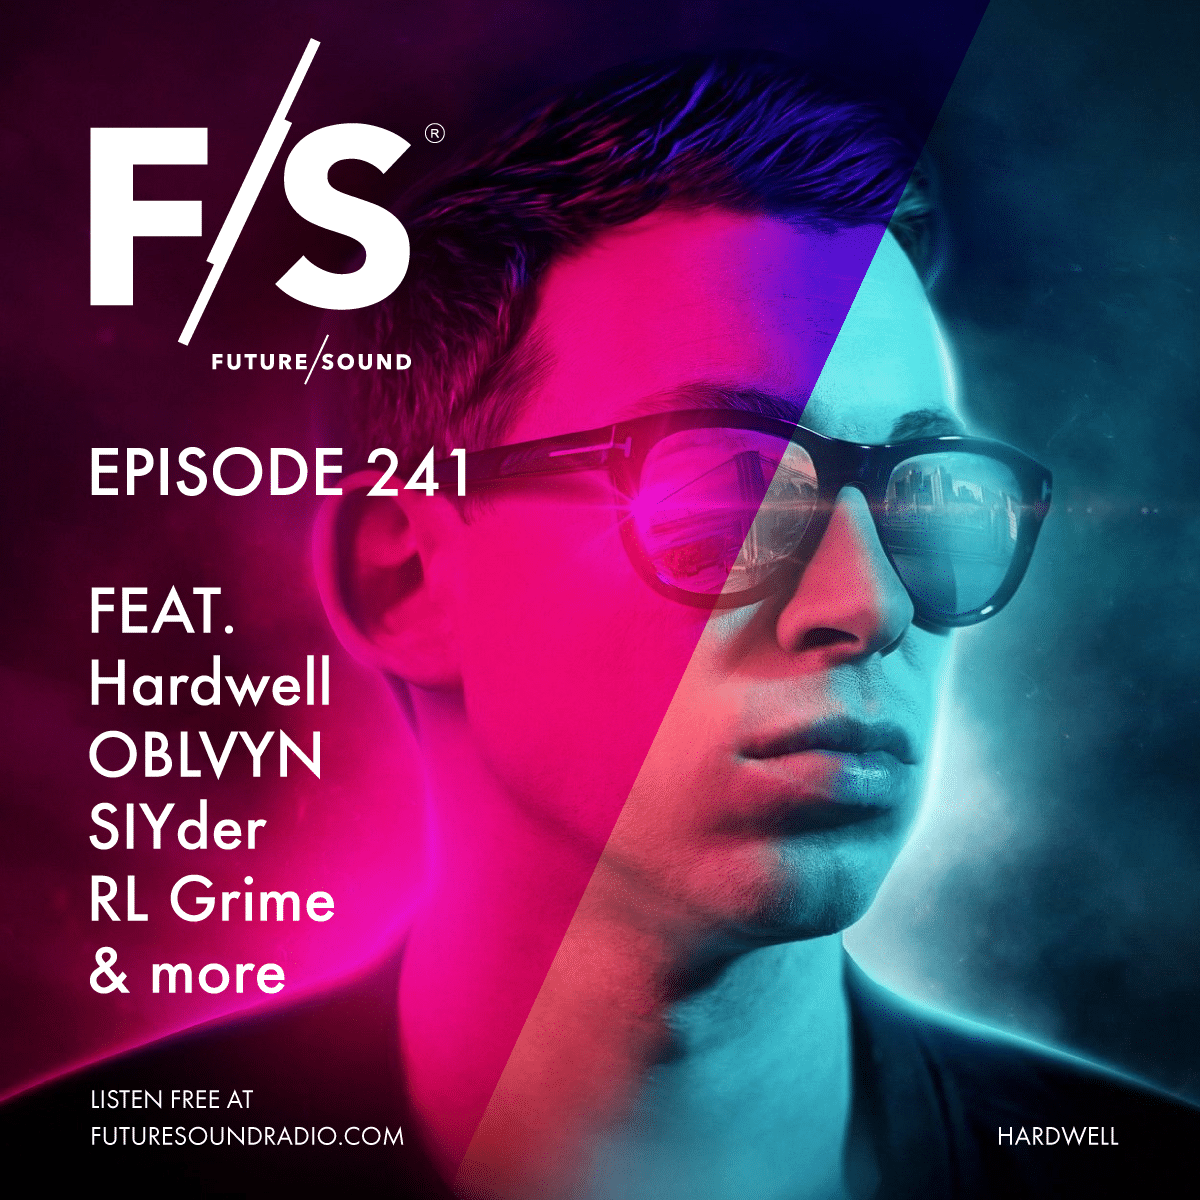 Future/Sound Episode 241 feat. Hardwell, OBLVYN, SlYder, RL Grime, and more